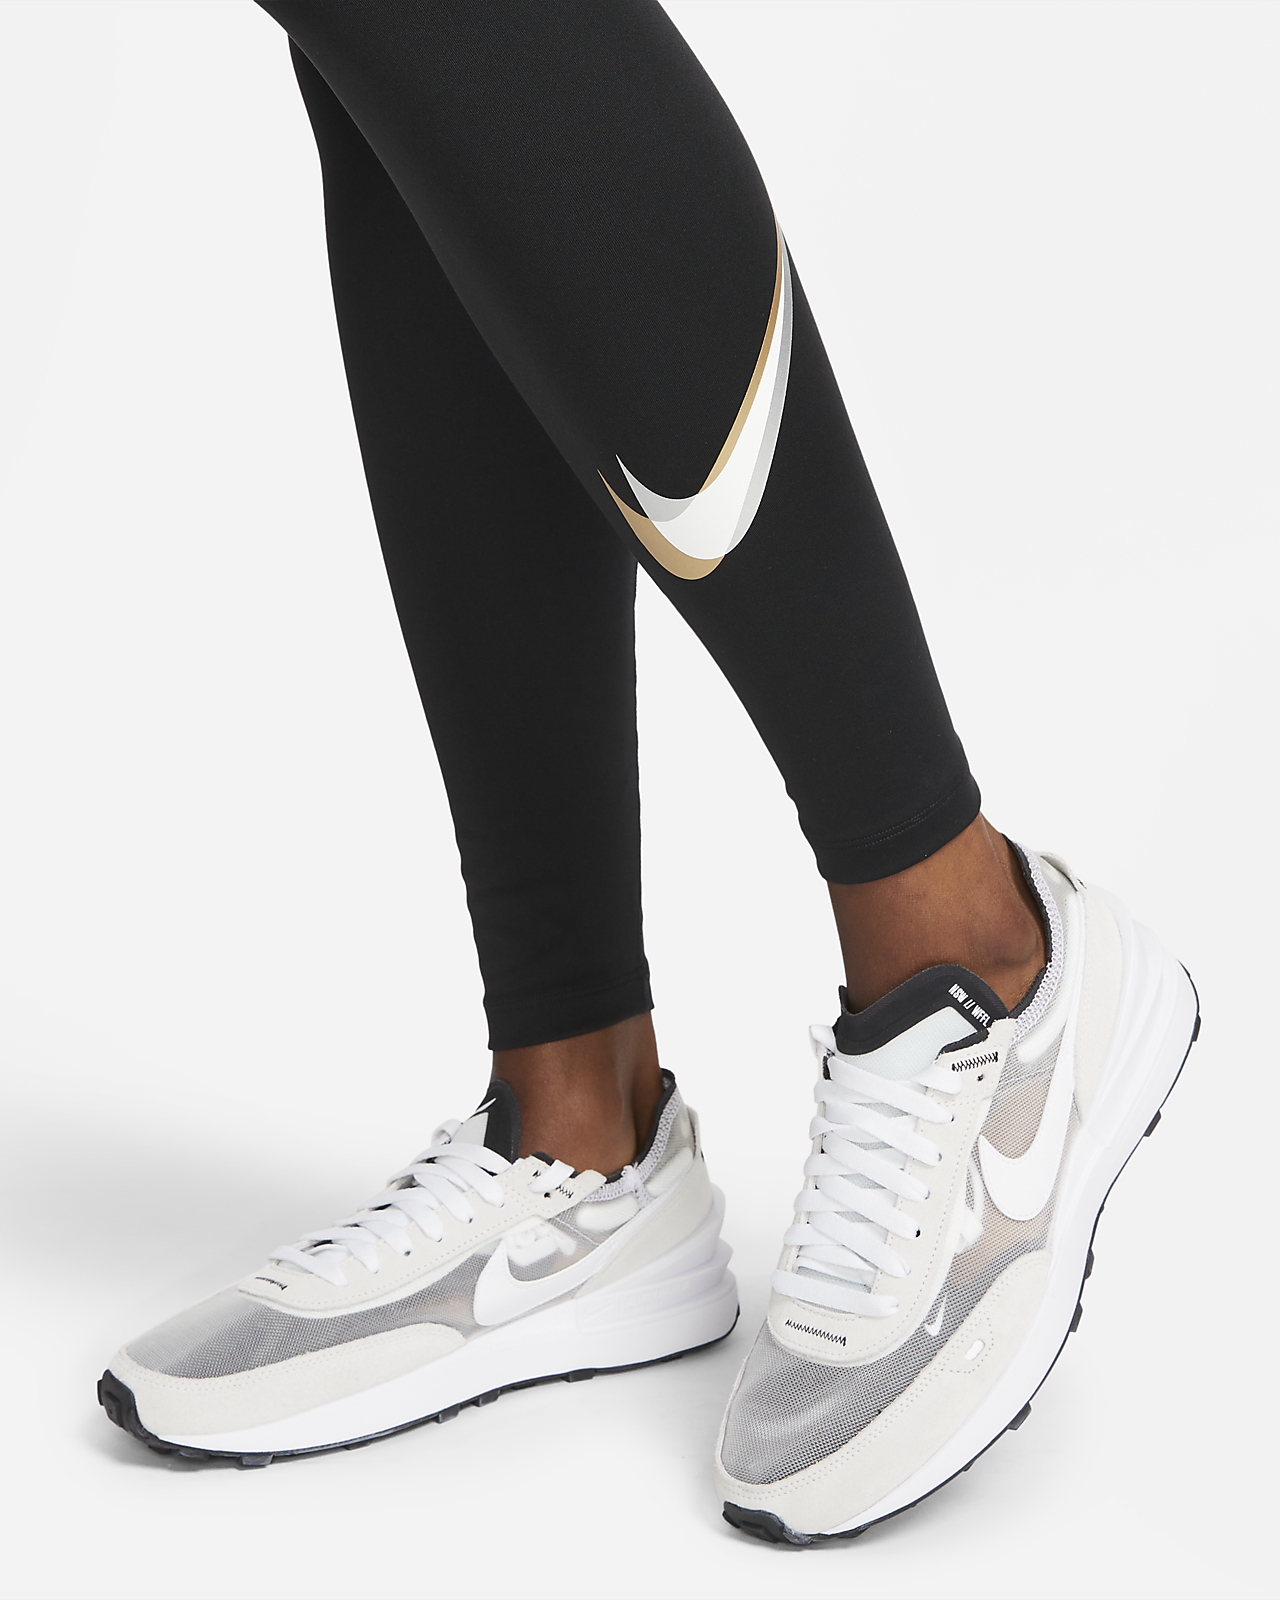 nike one luxe dri-fit